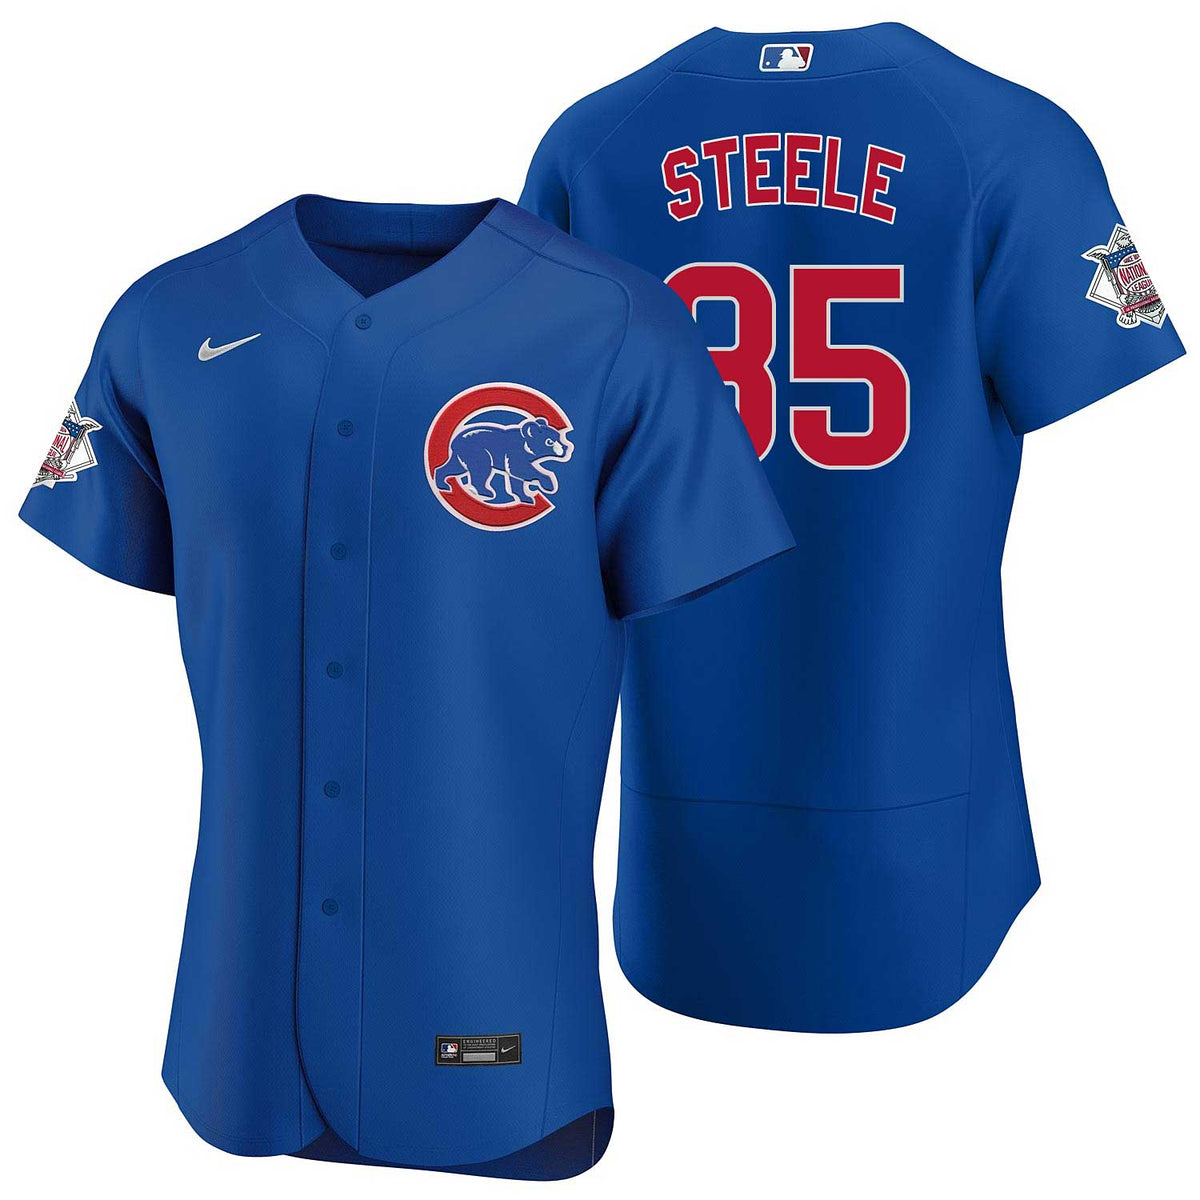 Nike / MLB Kerry Wood Chicago Cubs City Connect Jersey by Nike